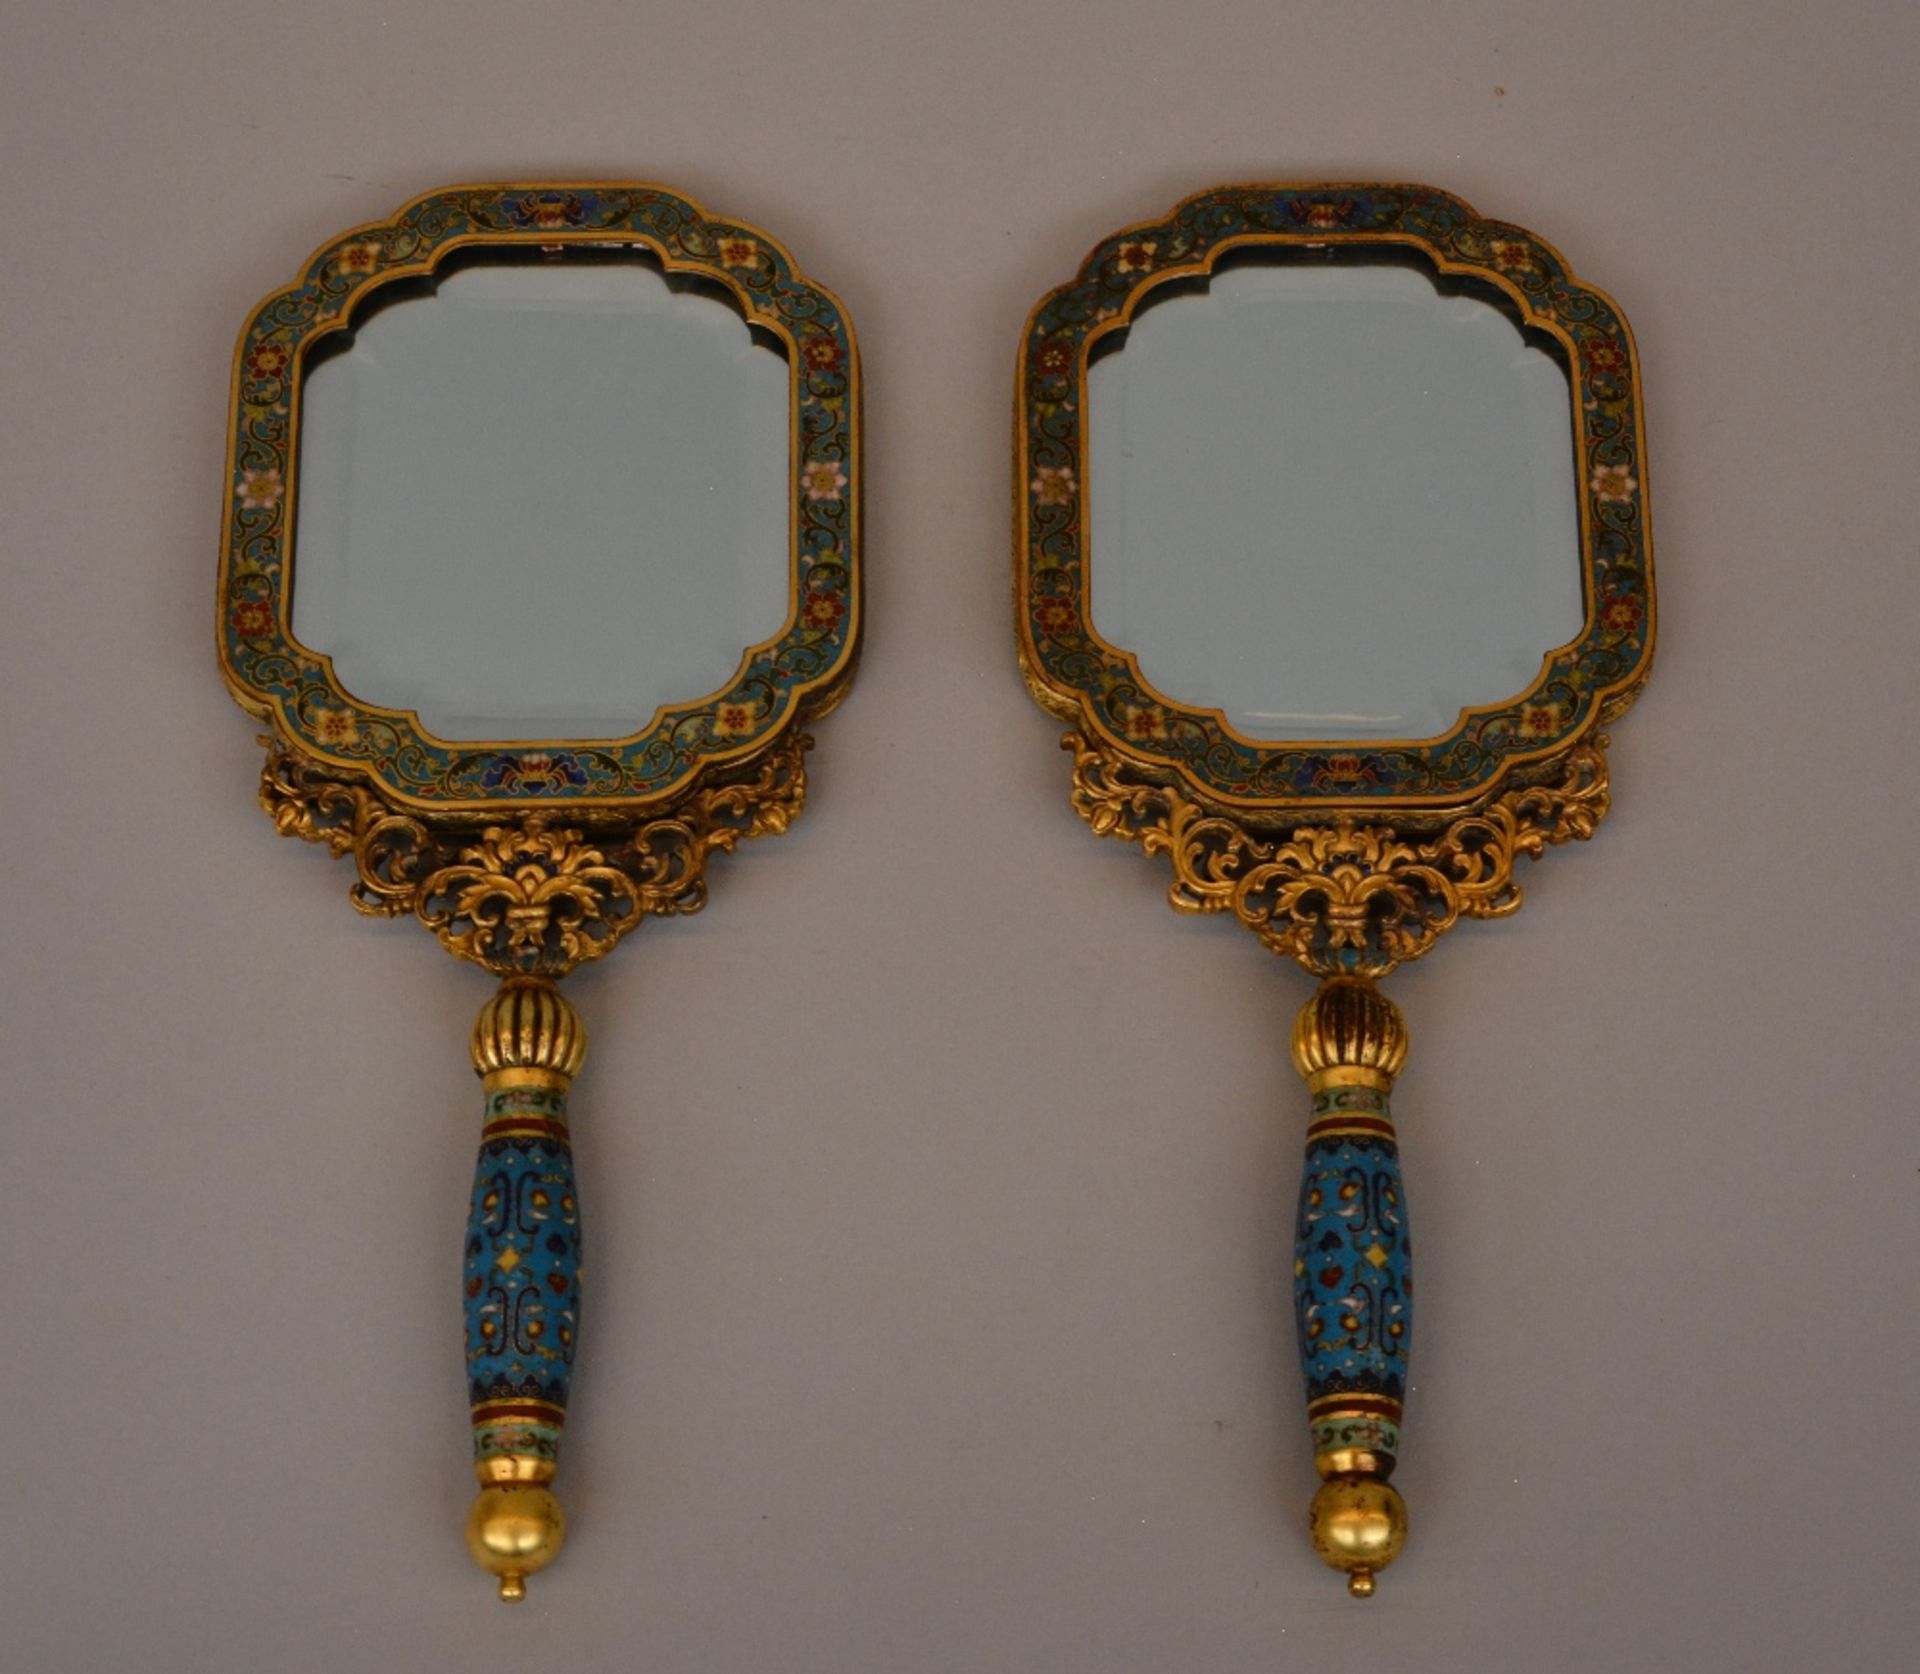 A pair of exceptional Chinese hand mirrors, gilt bronze and cloisonné decoration, the back side